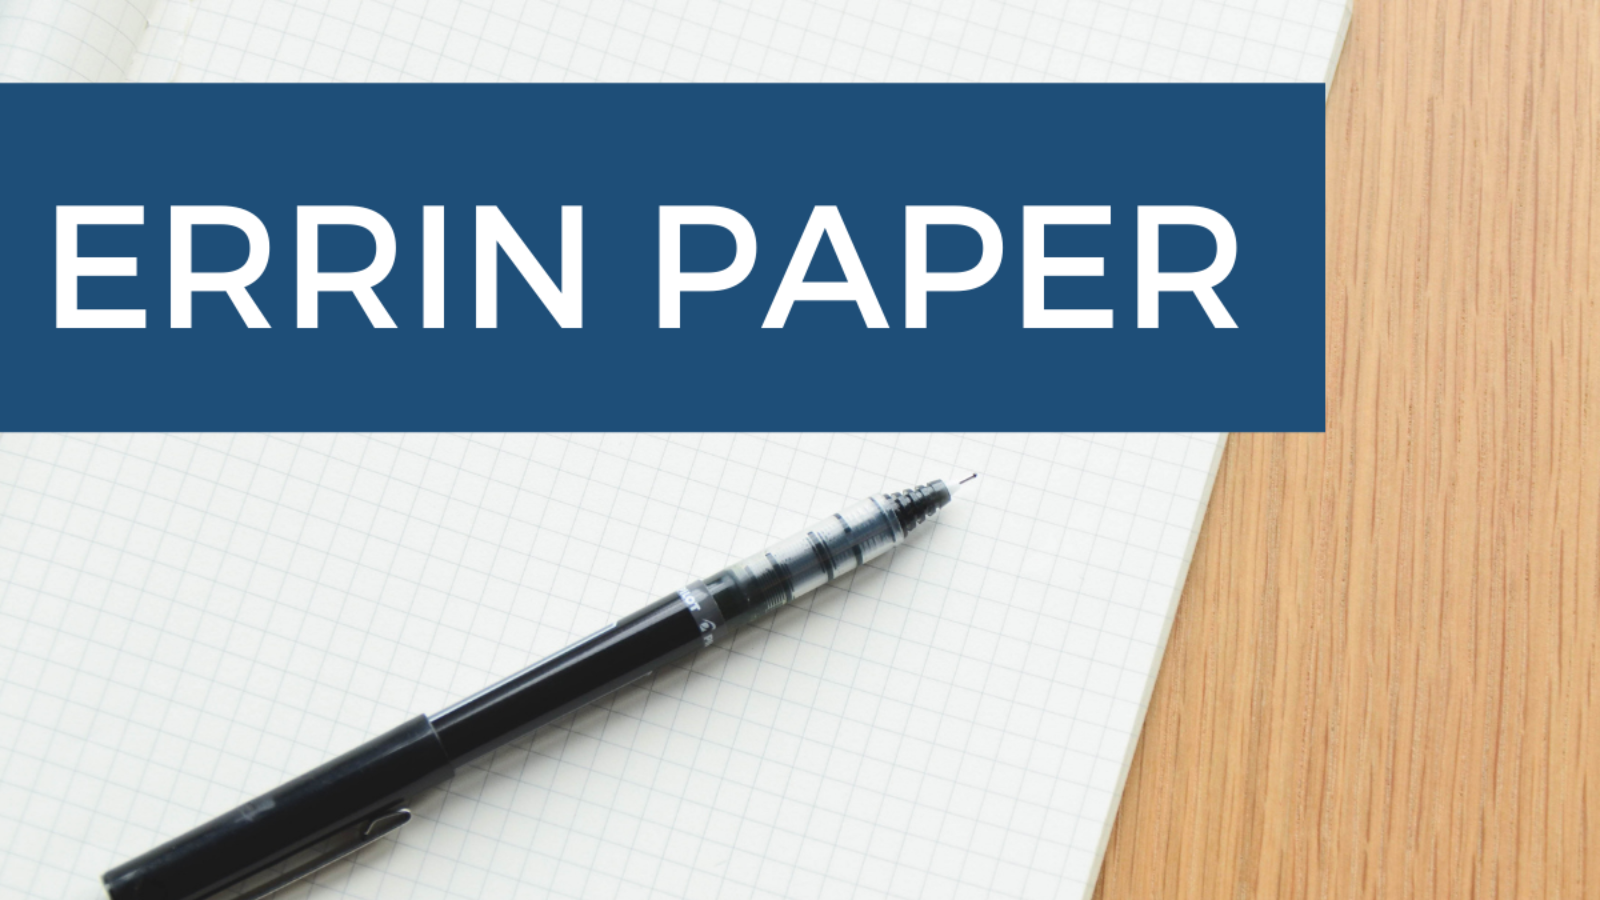 ERRIN two-pager for European decision-makers